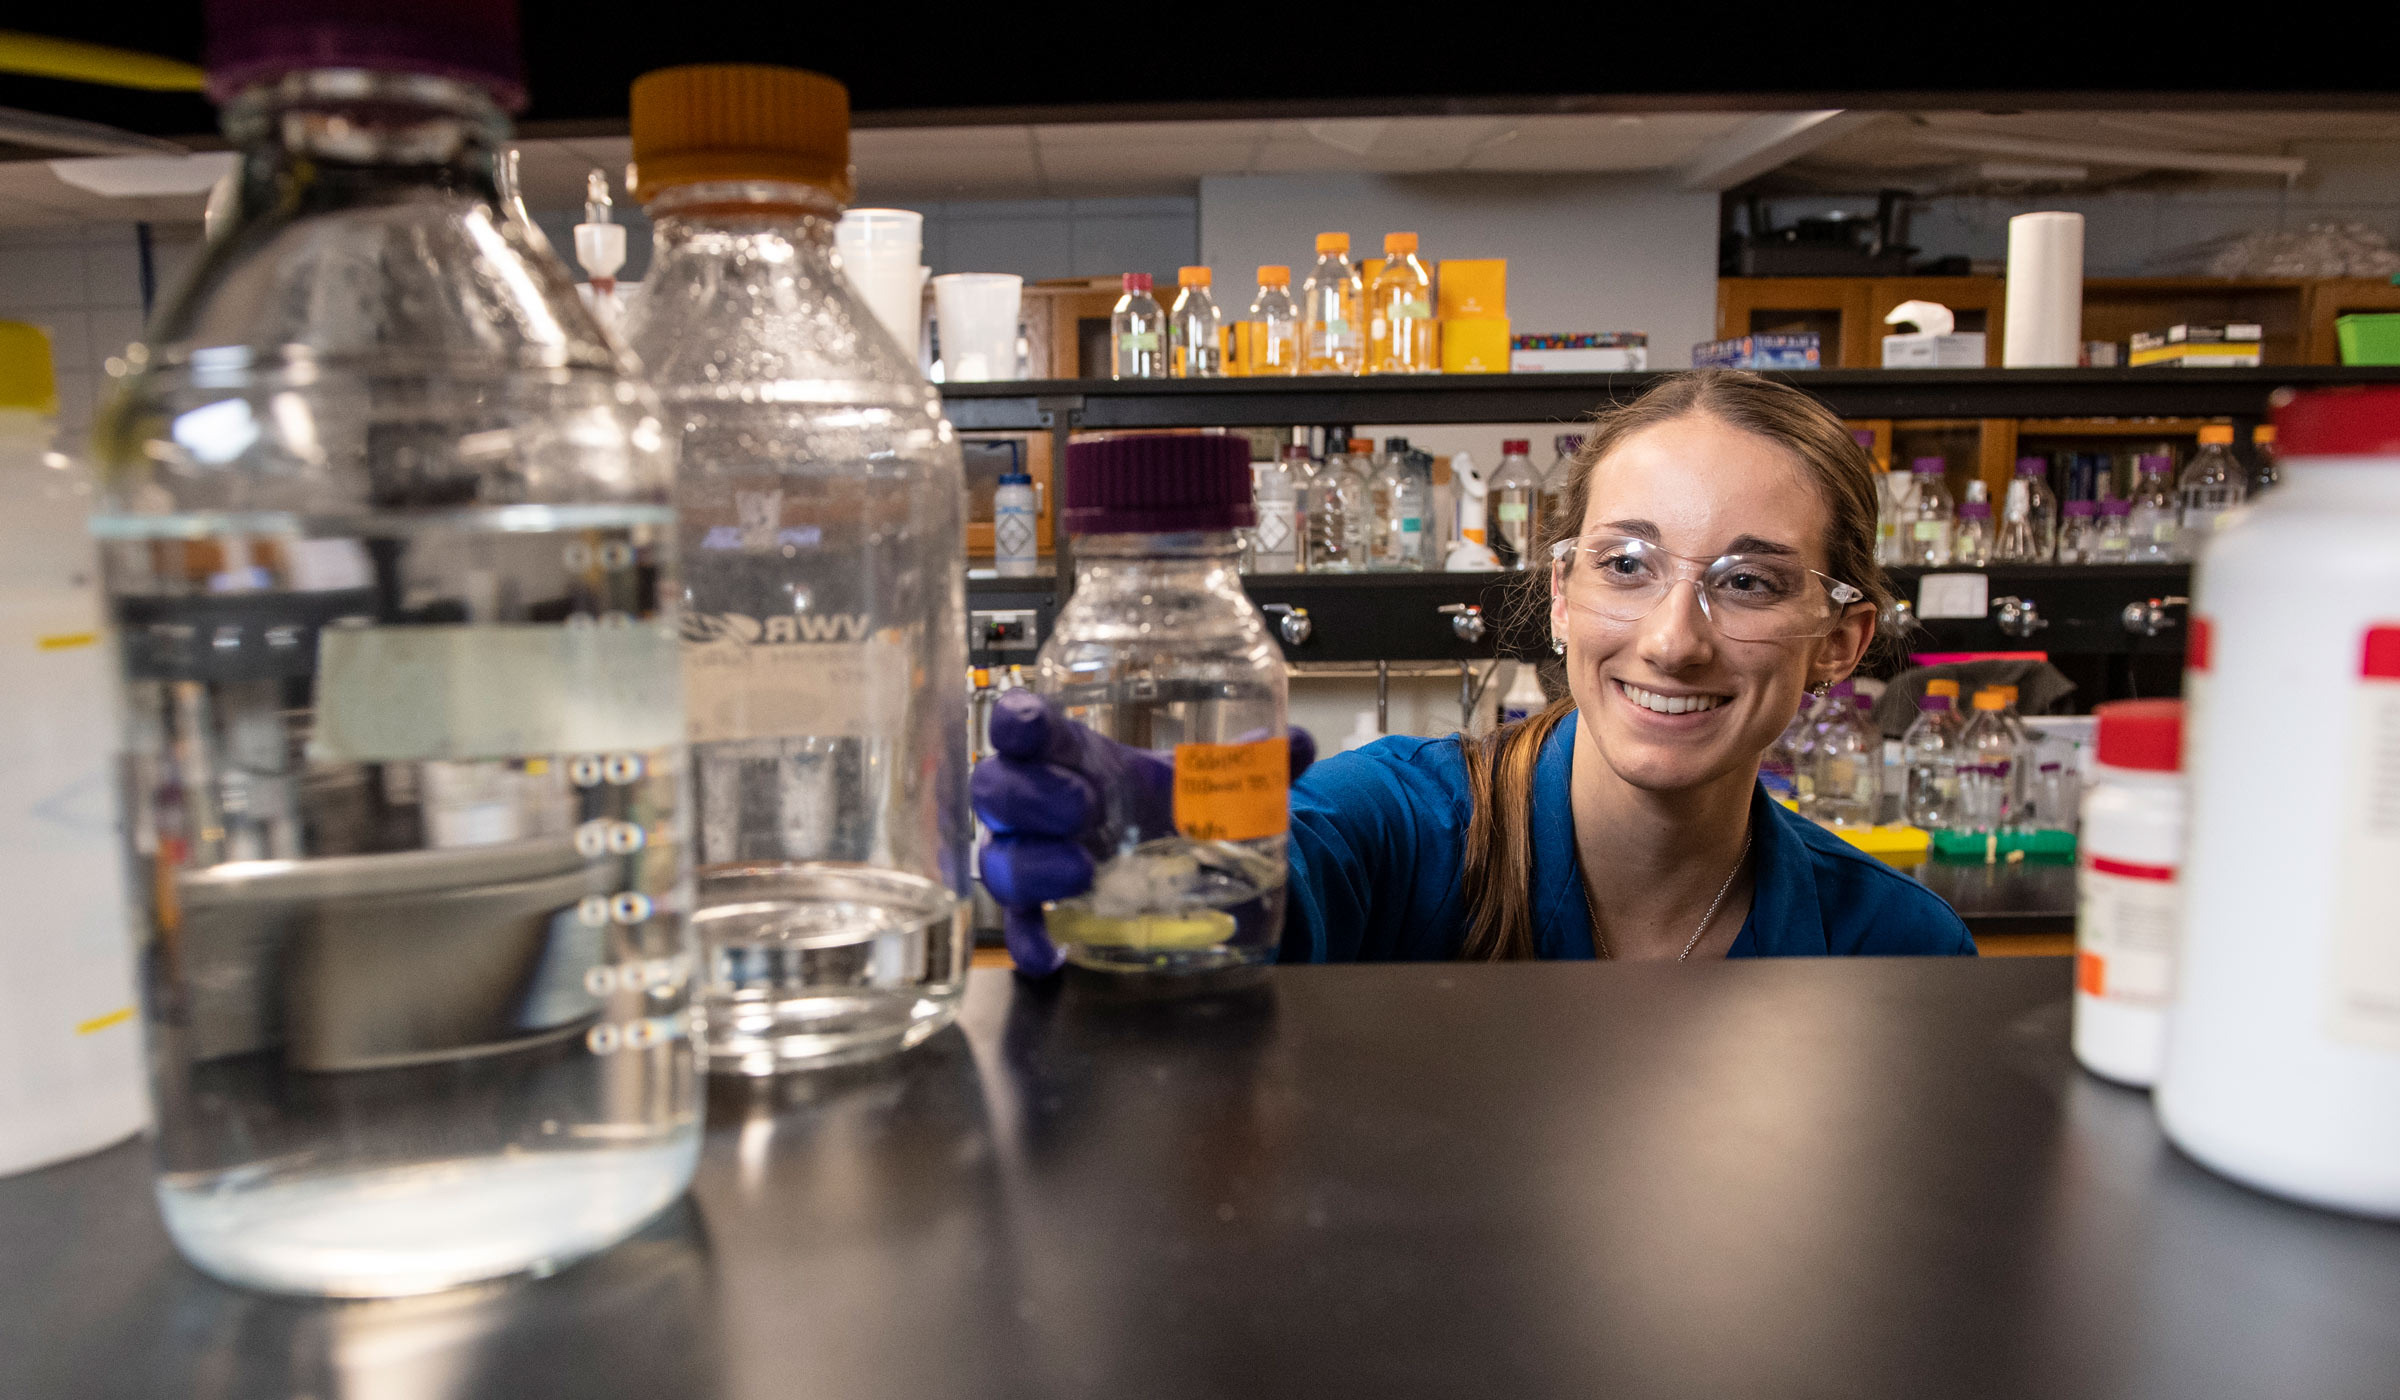 Emily Chappell, pictured in a research lab.